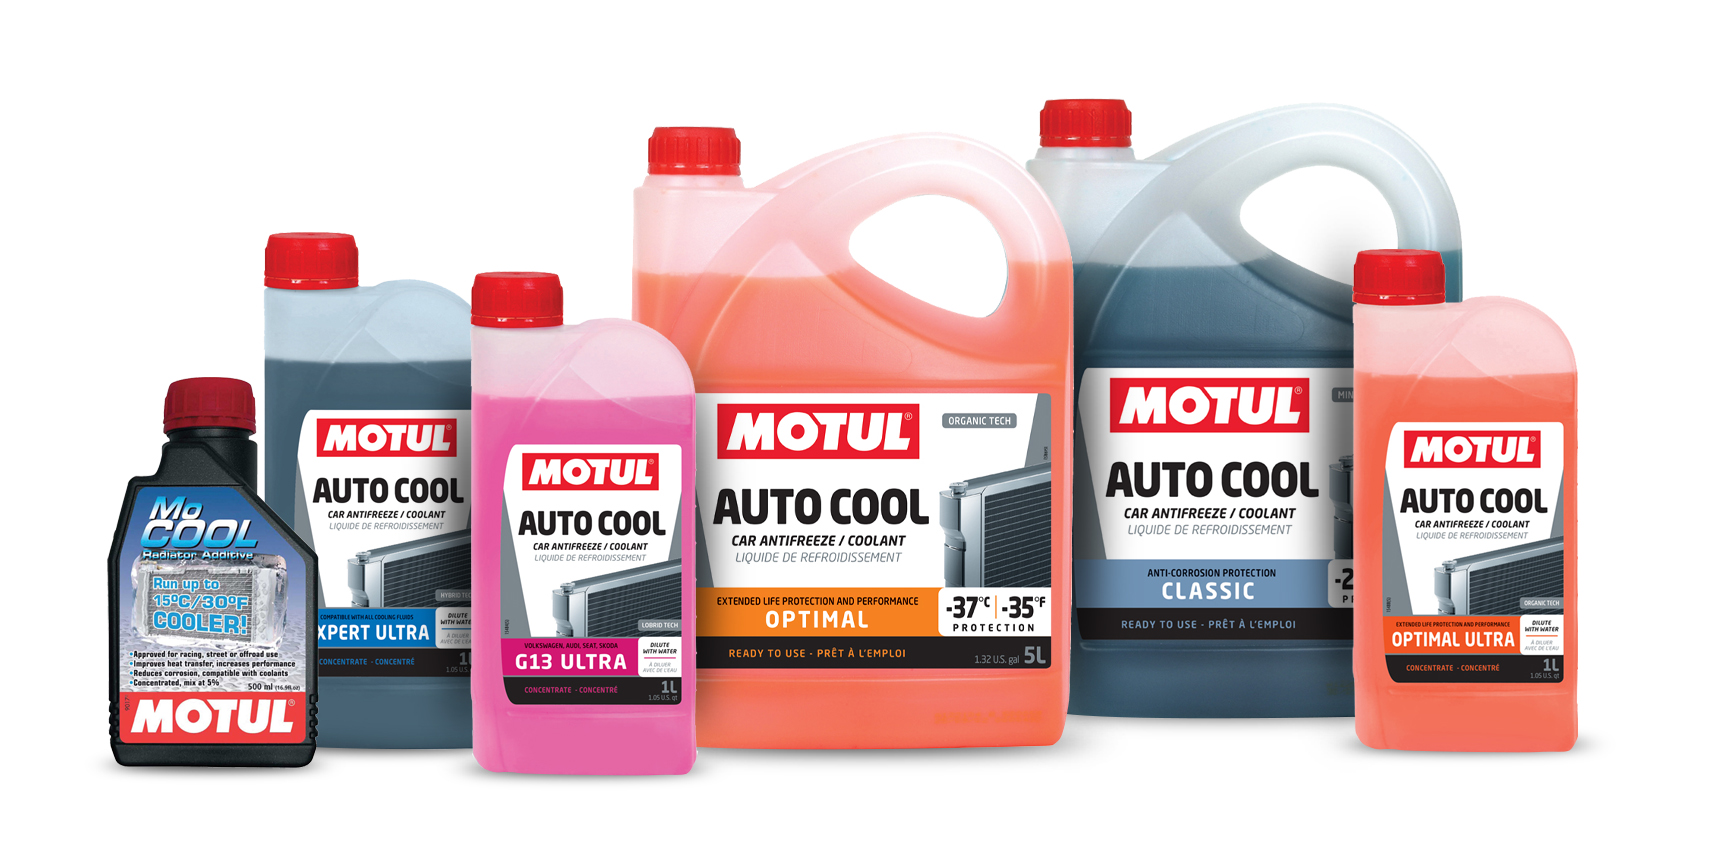 Motul Auto Cool Optimal Ultra, Concentrated Coolant Antifreeze